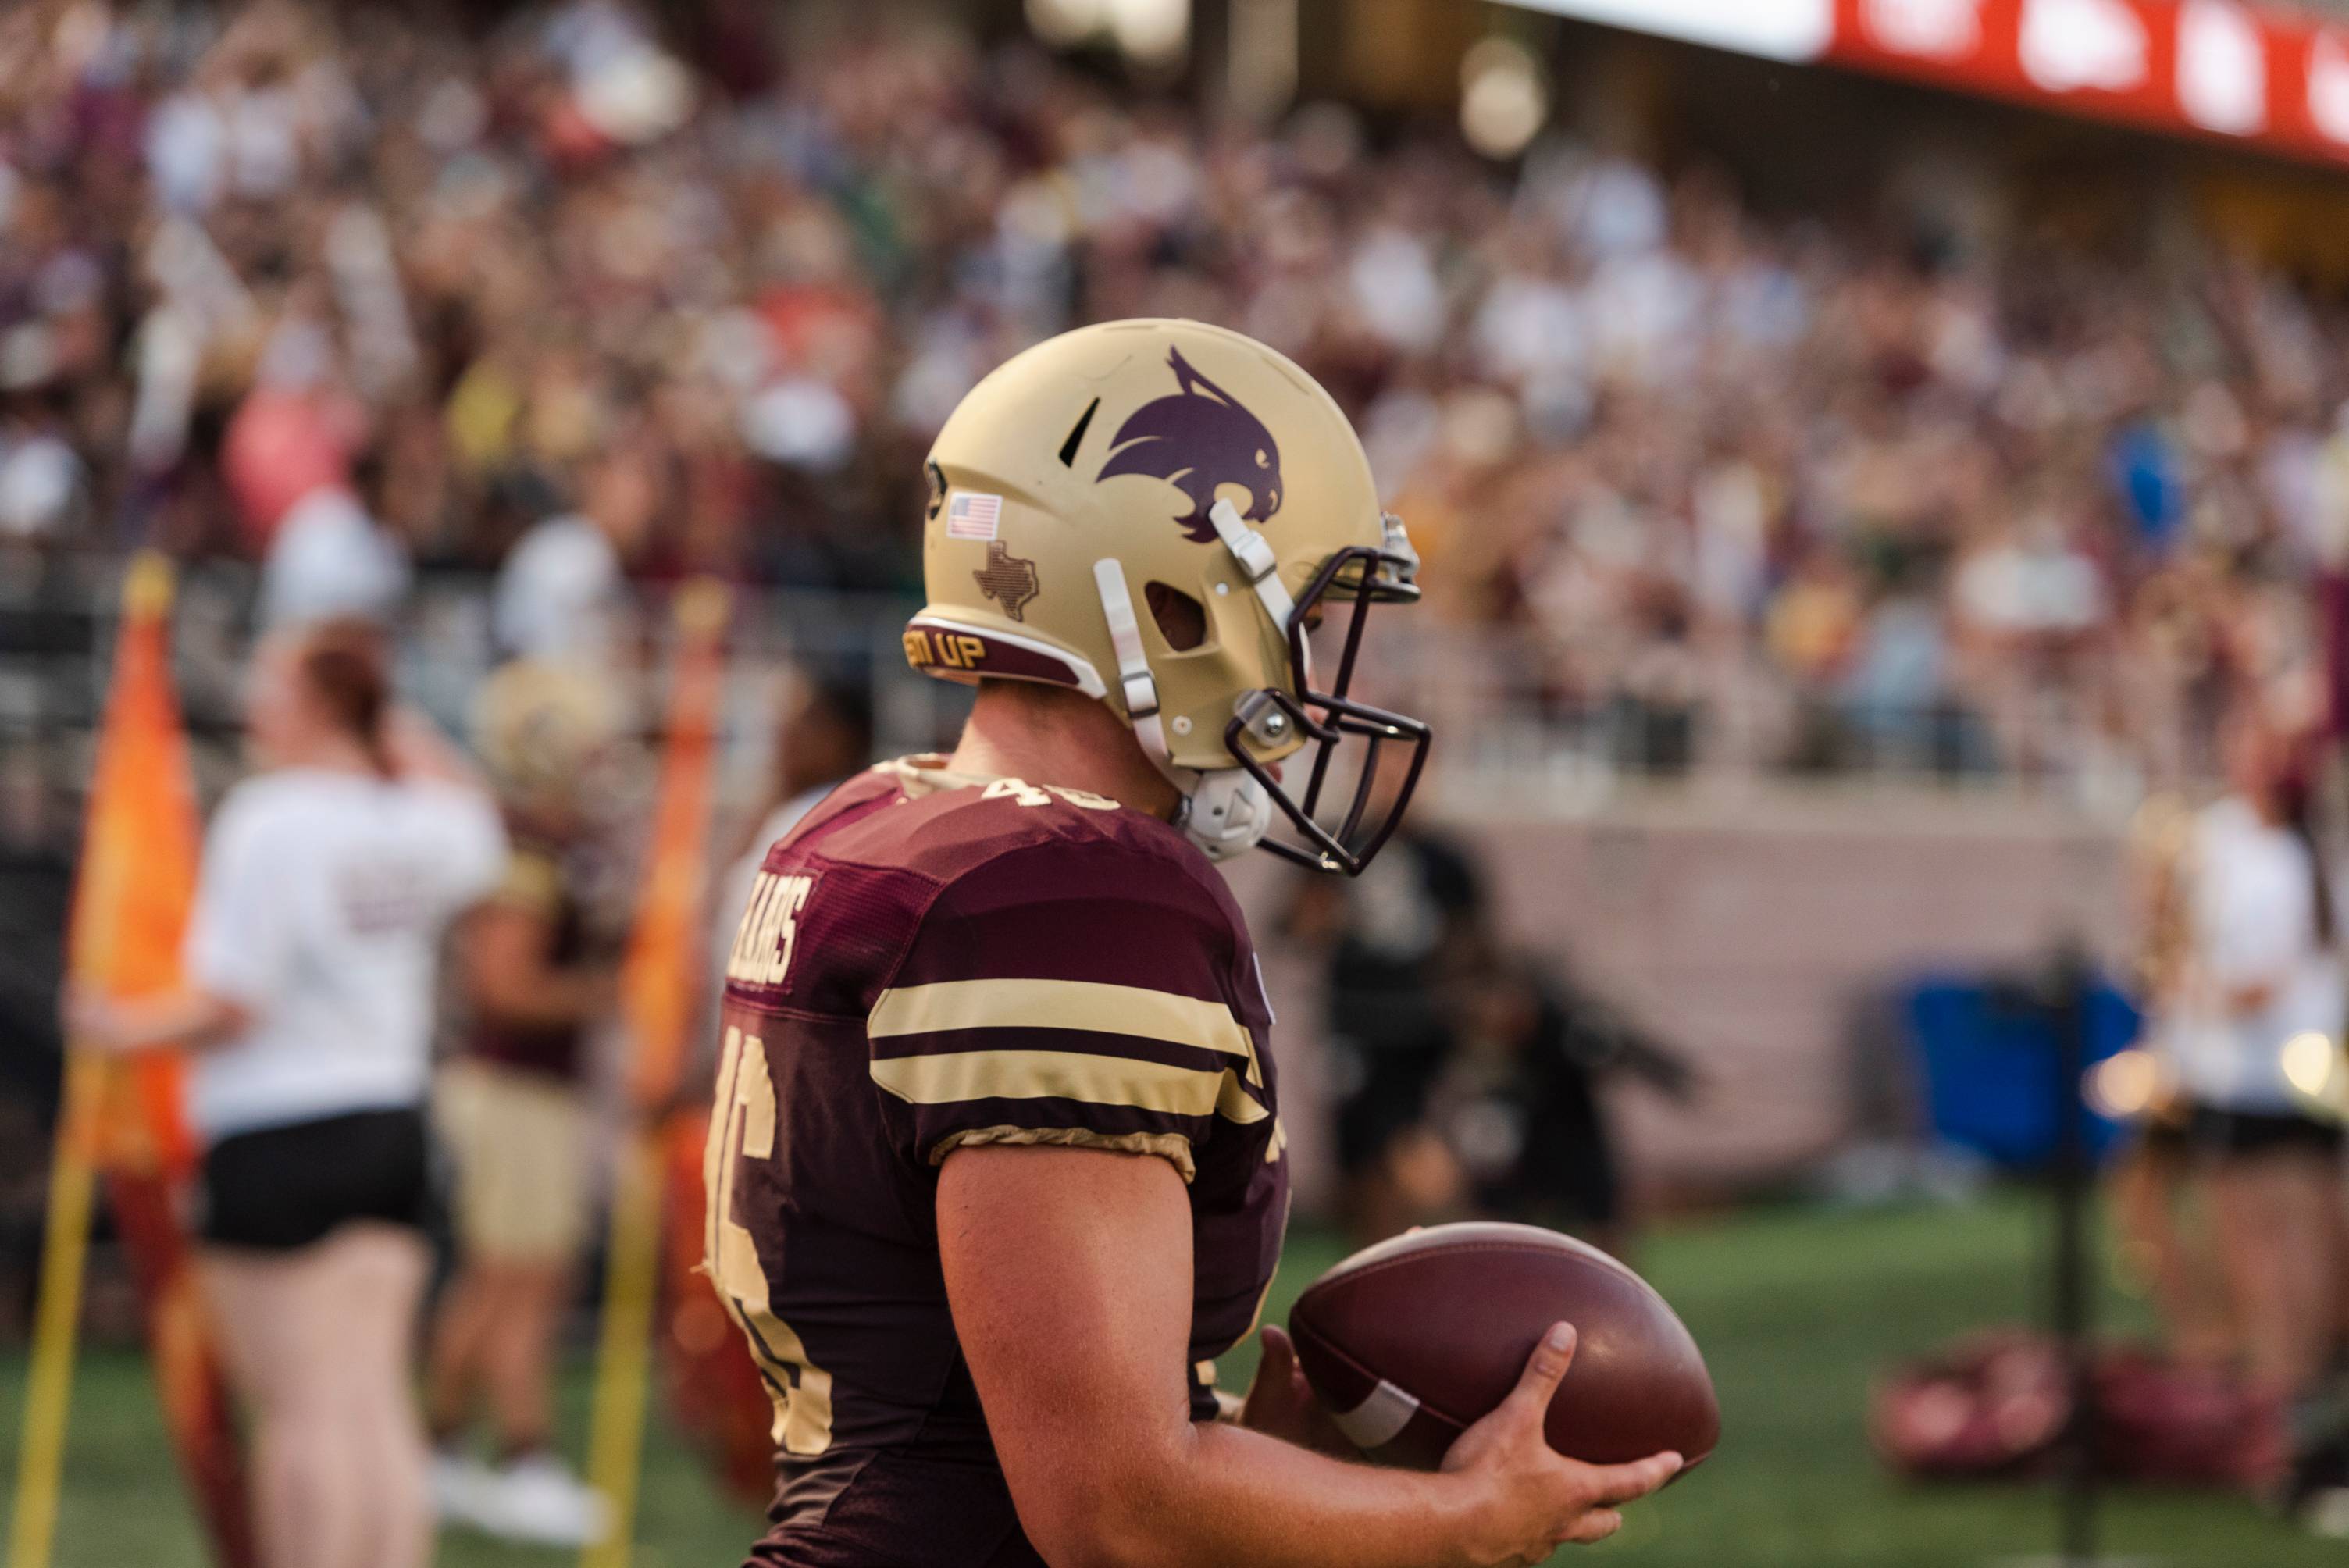 Football player in official TXST uniform